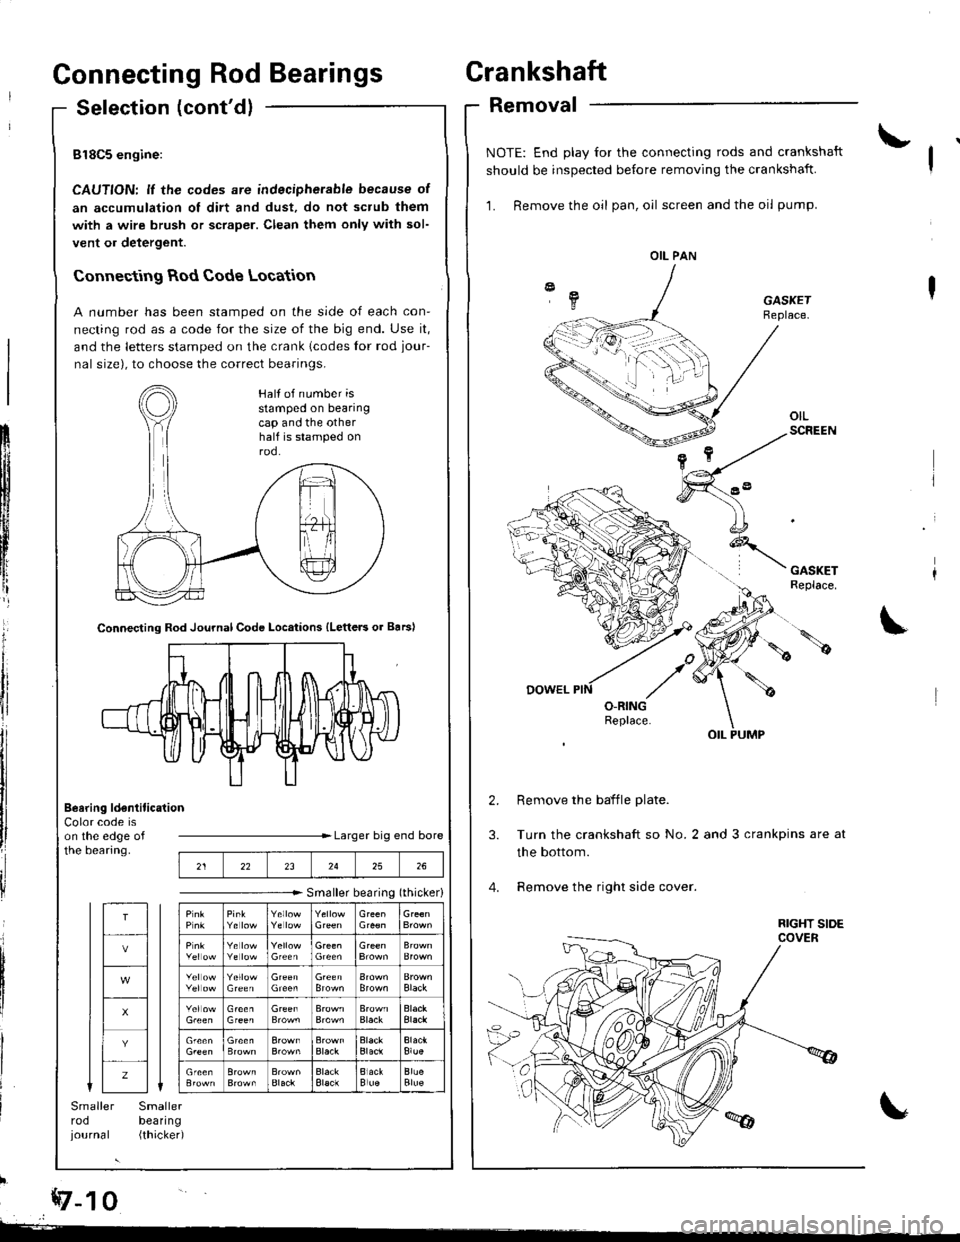 HONDA INTEGRA 1998 4.G User Guide Connecting Rod BearingsCrankshaft
Selection (contdlRemoval
818C5 engine:
CAUTION: lf the codes are indecipherable because of
an accumulation of dirt and dust, do not scrub them
with a wire brush or s